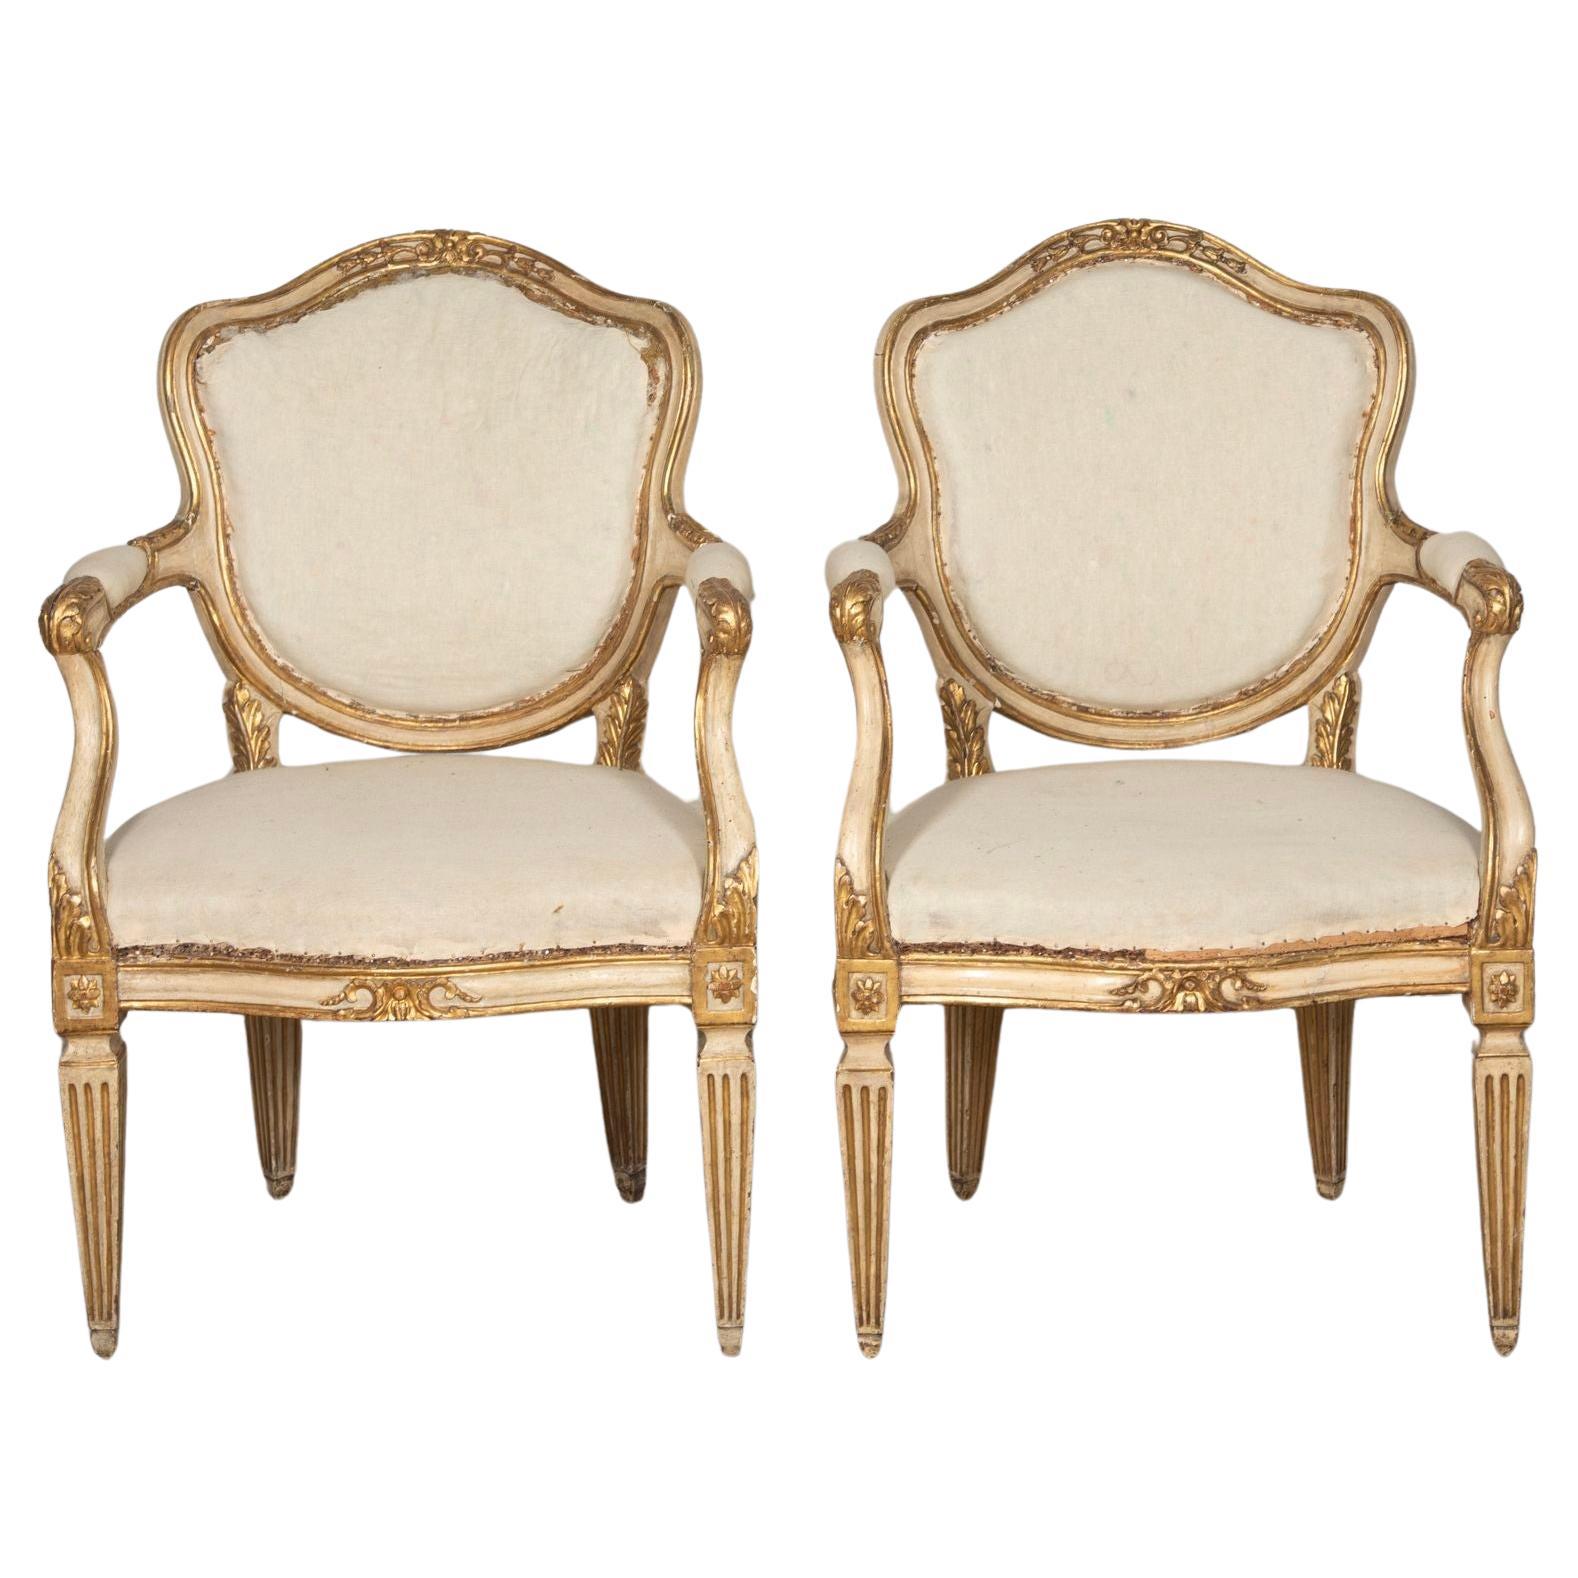 Pair of Early 19th Century Italian Armchairs For Sale